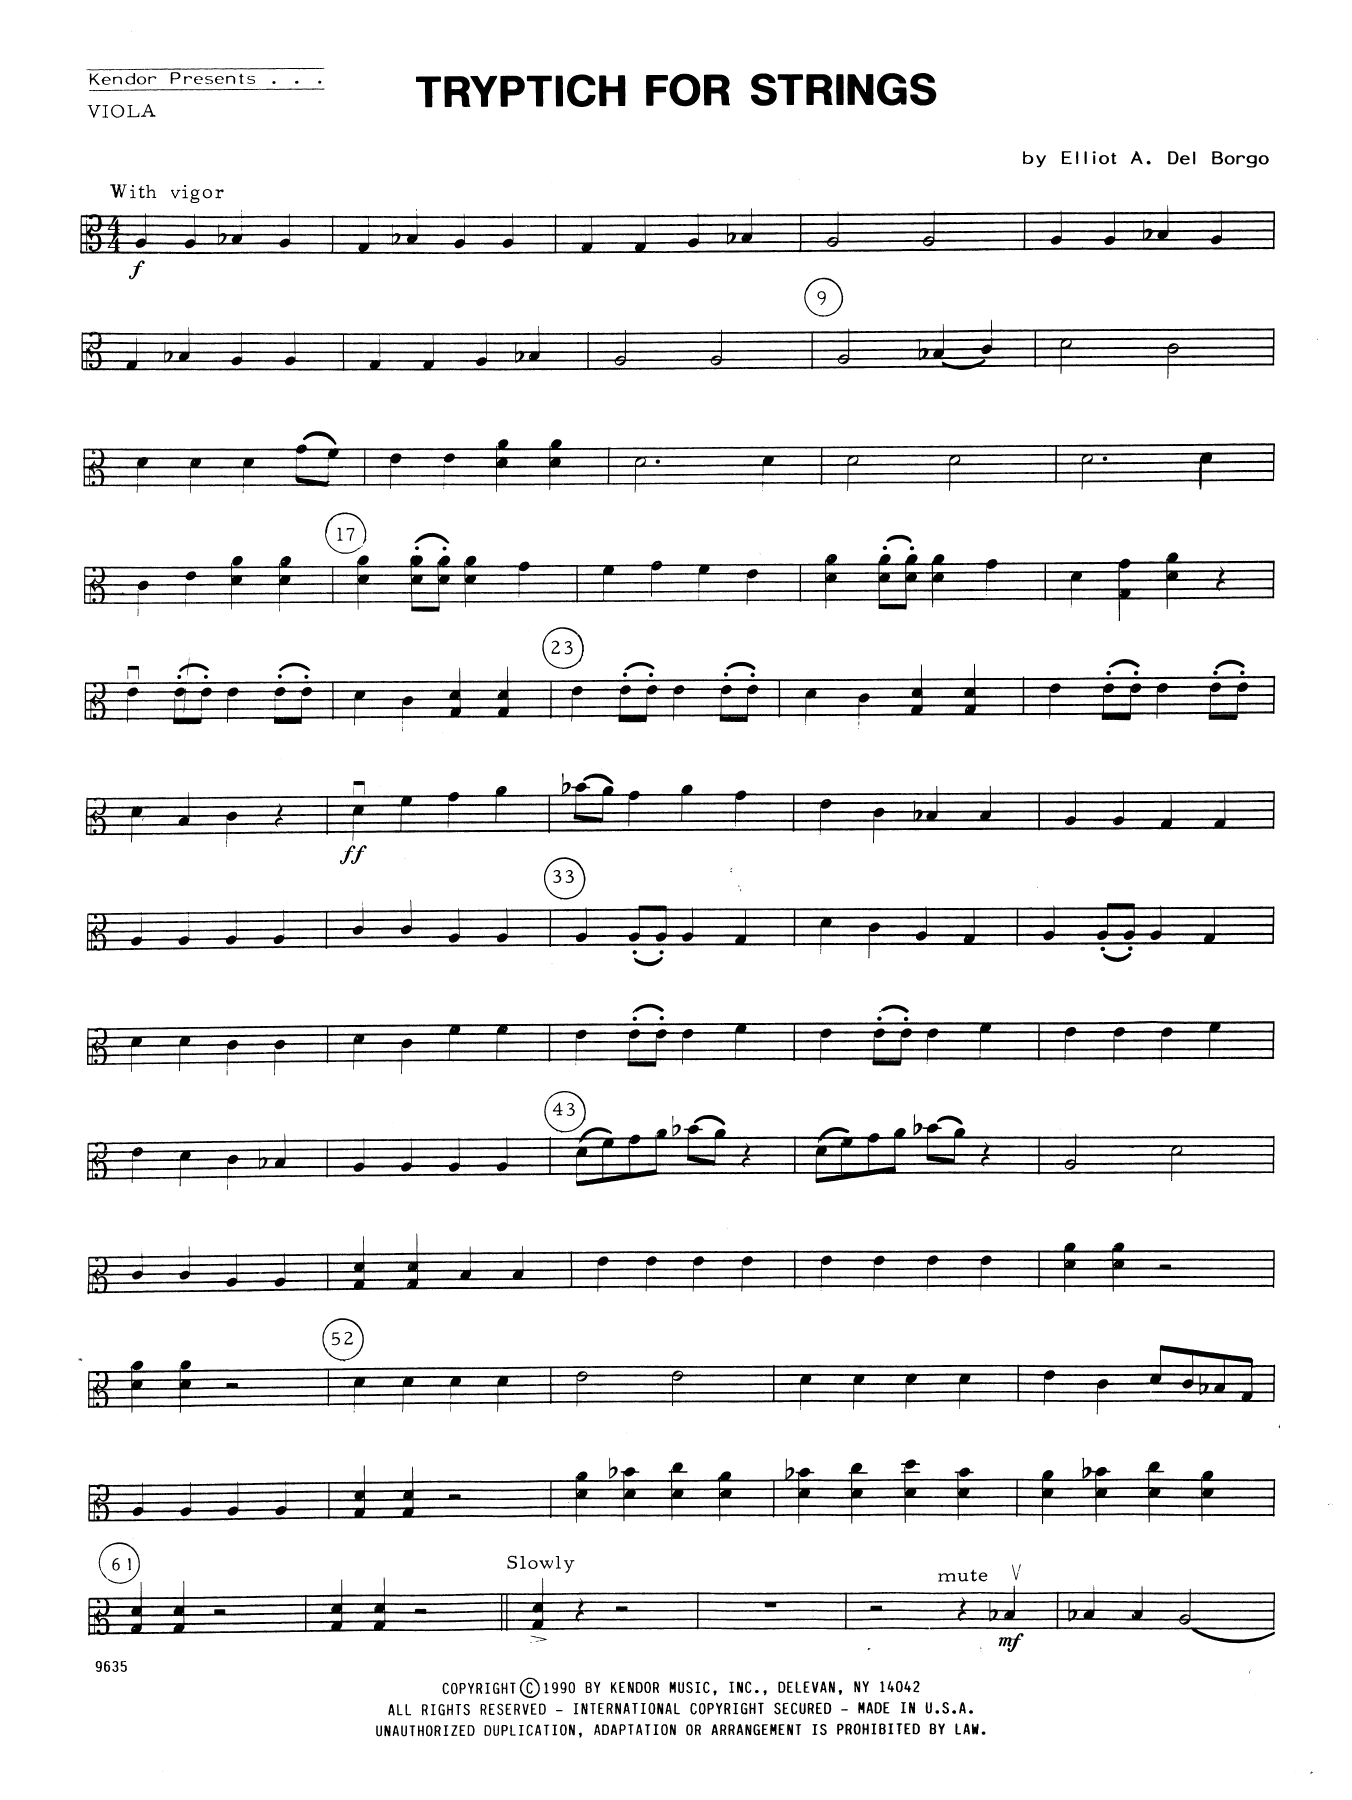 Download Elliot A. Del Borgo Tryptich For Strings - Viola Sheet Music